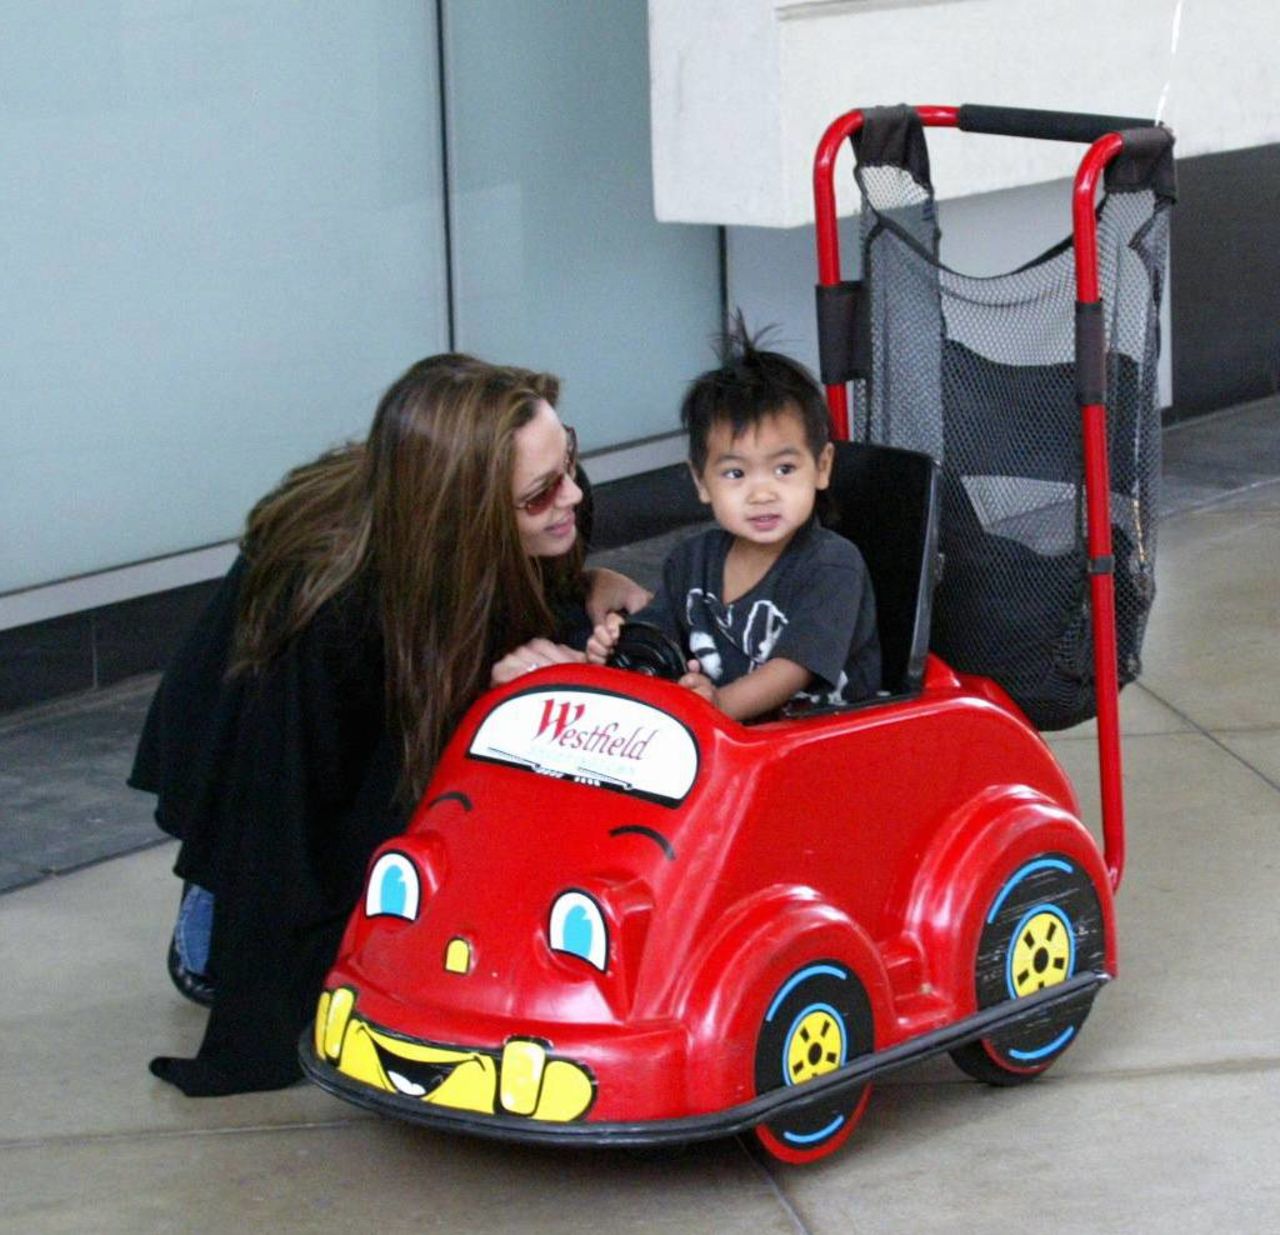 Maddox was small enough to fit into this little toy car. The first addition to the Jolie-Pitt family, Maddox was born in Cambodia and adopted by Jolie in 2002, when the actress was still married to Billy Bob Thornton.